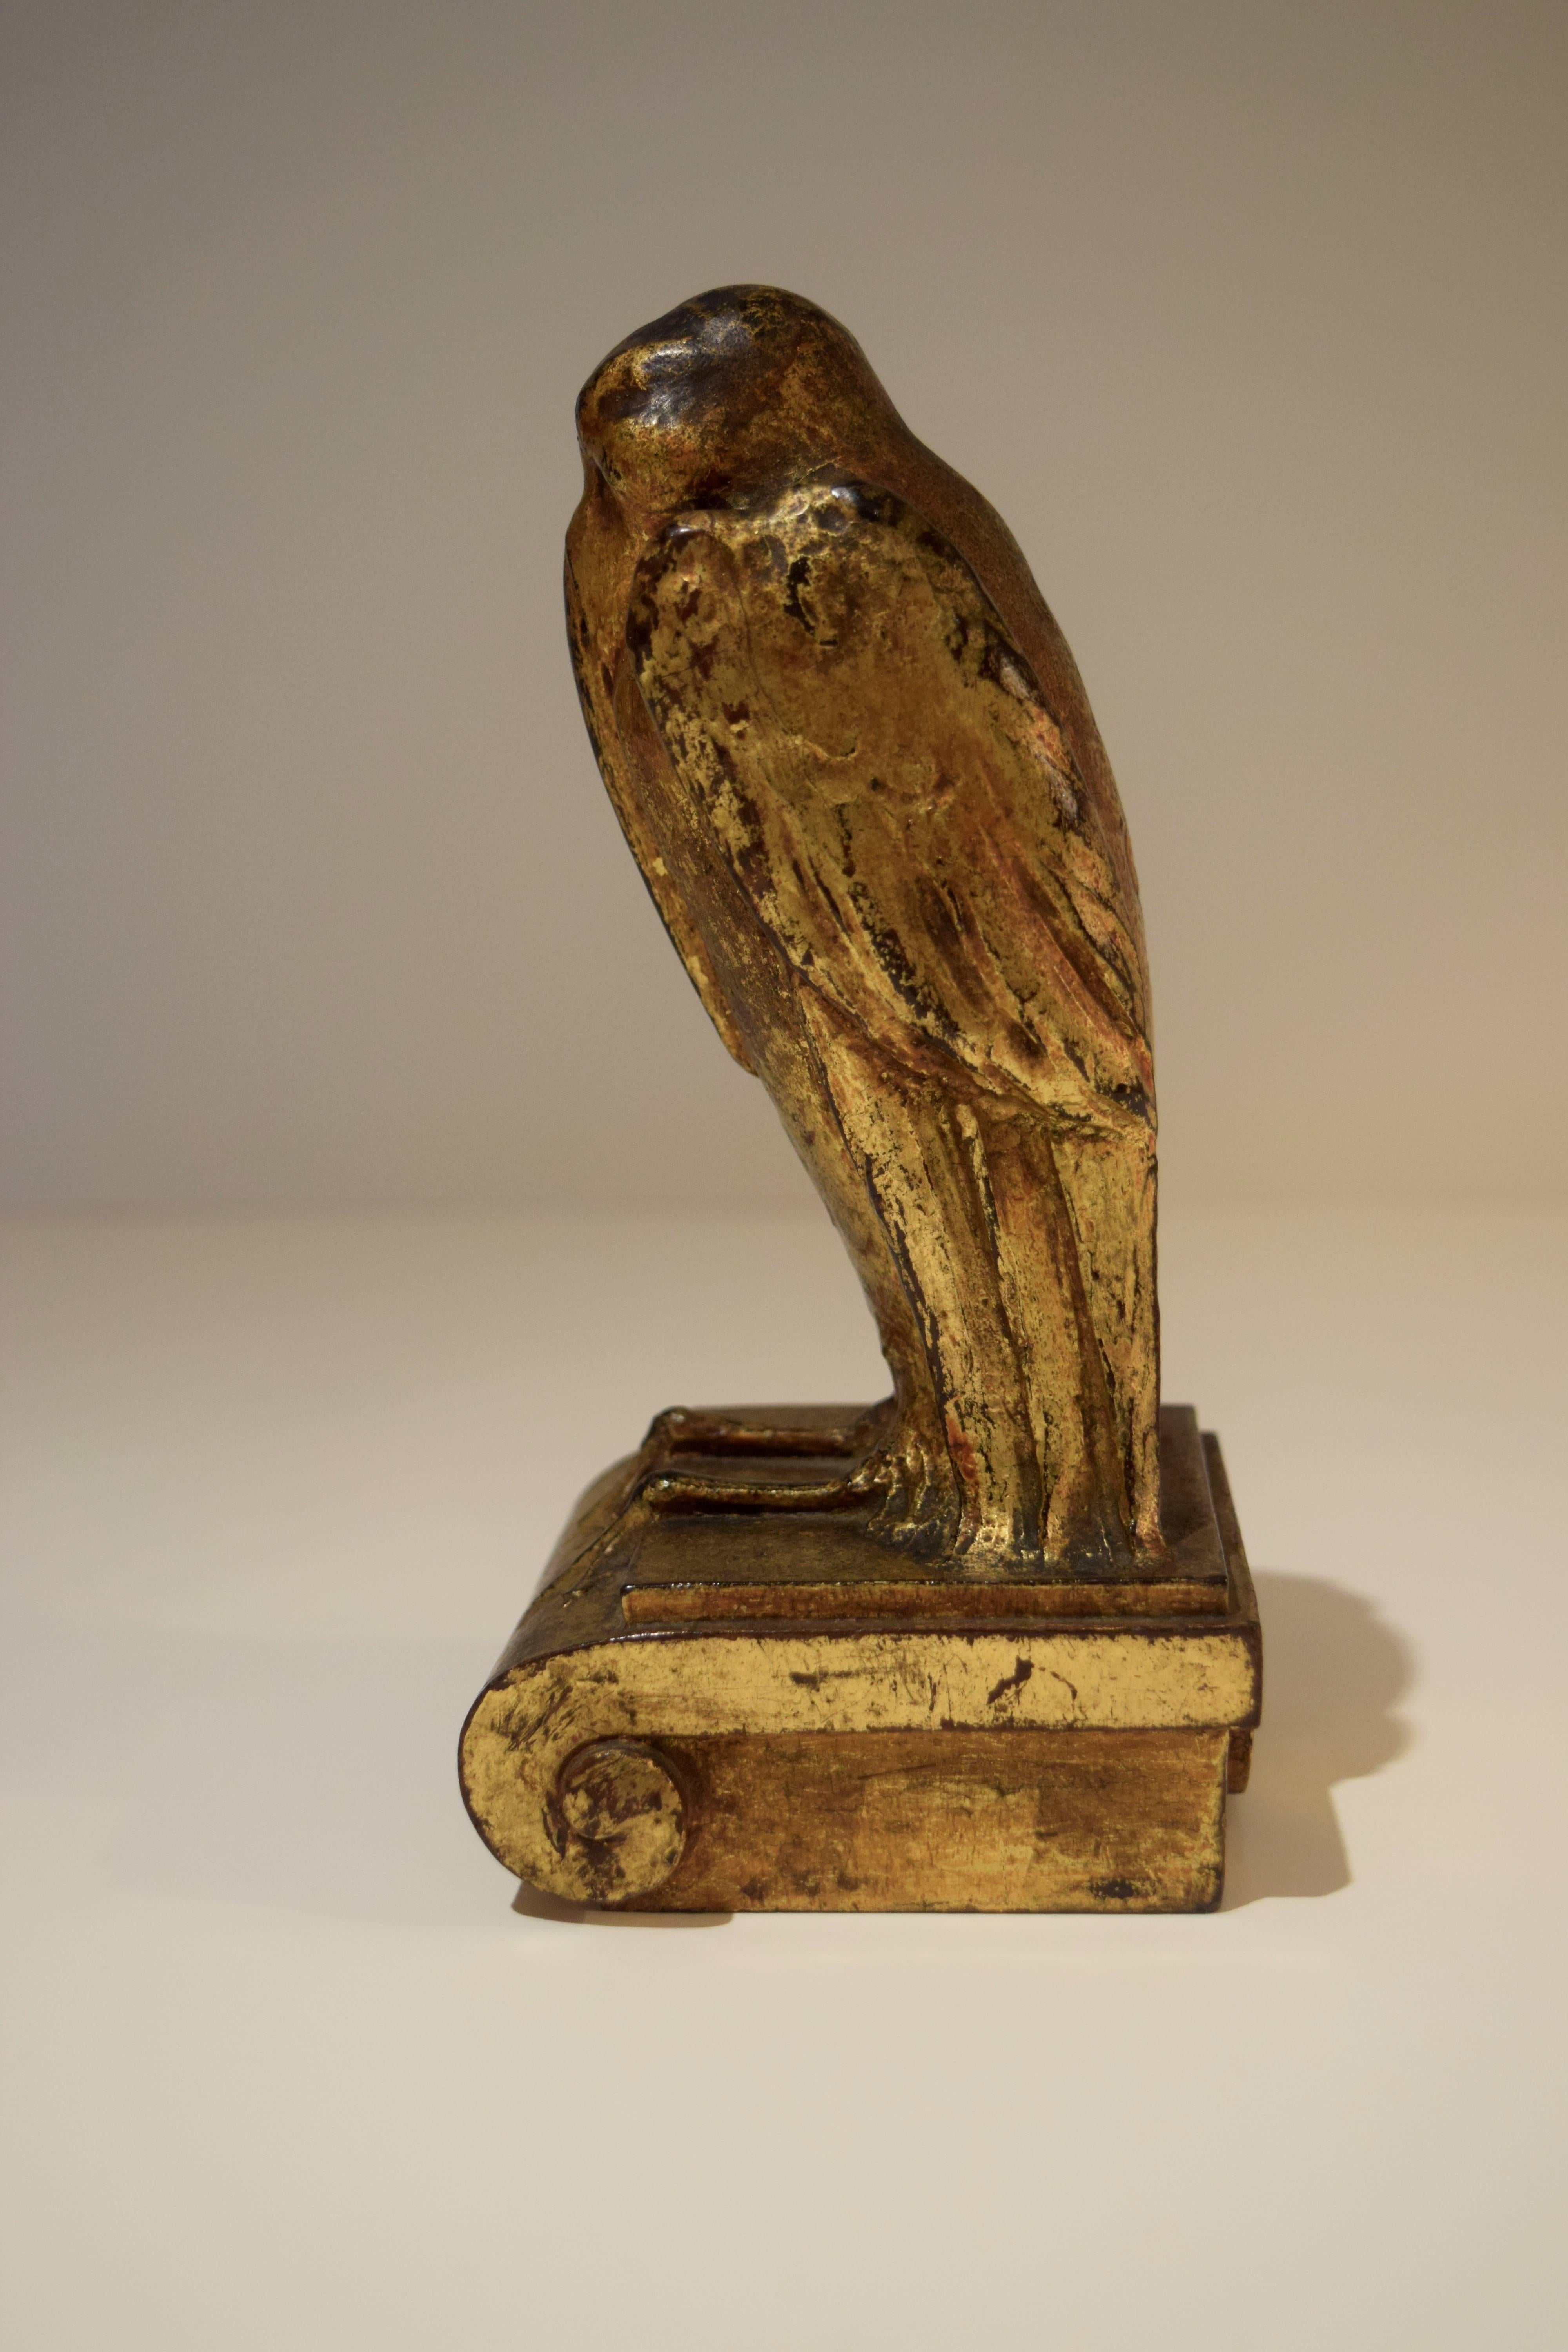 Early 20th Century American Arts & Crafts Sculpture of a Pelican, Circa 1910 For Sale